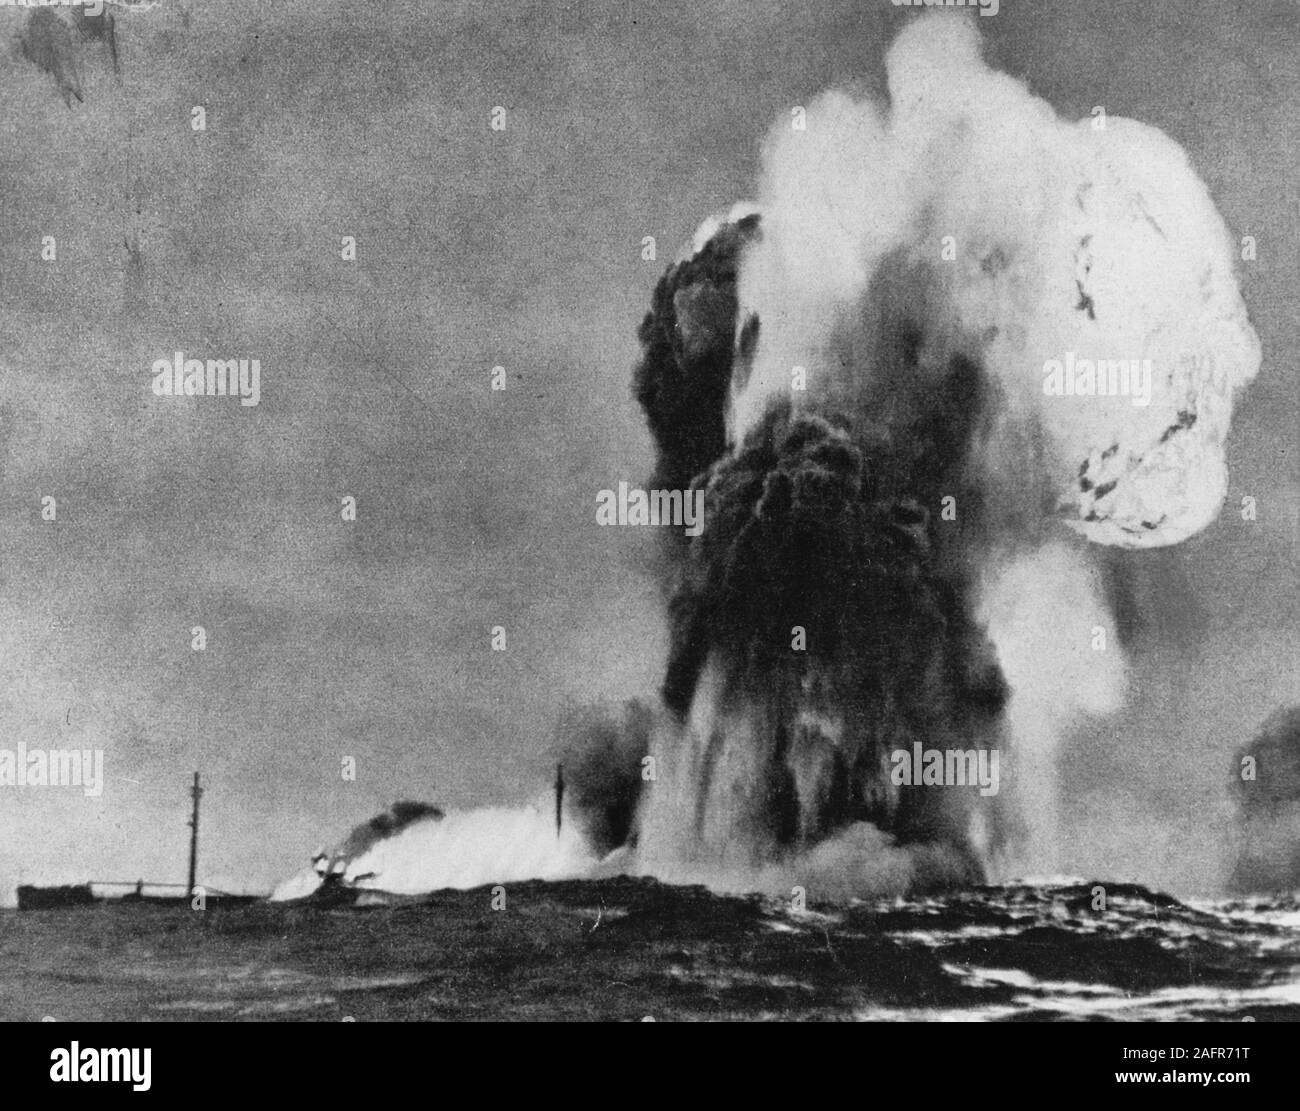 A British Tanker Blows Up - After being torpedoed by a German submarine. Copied from a German book on their navy, published during World War II. Stock Photo